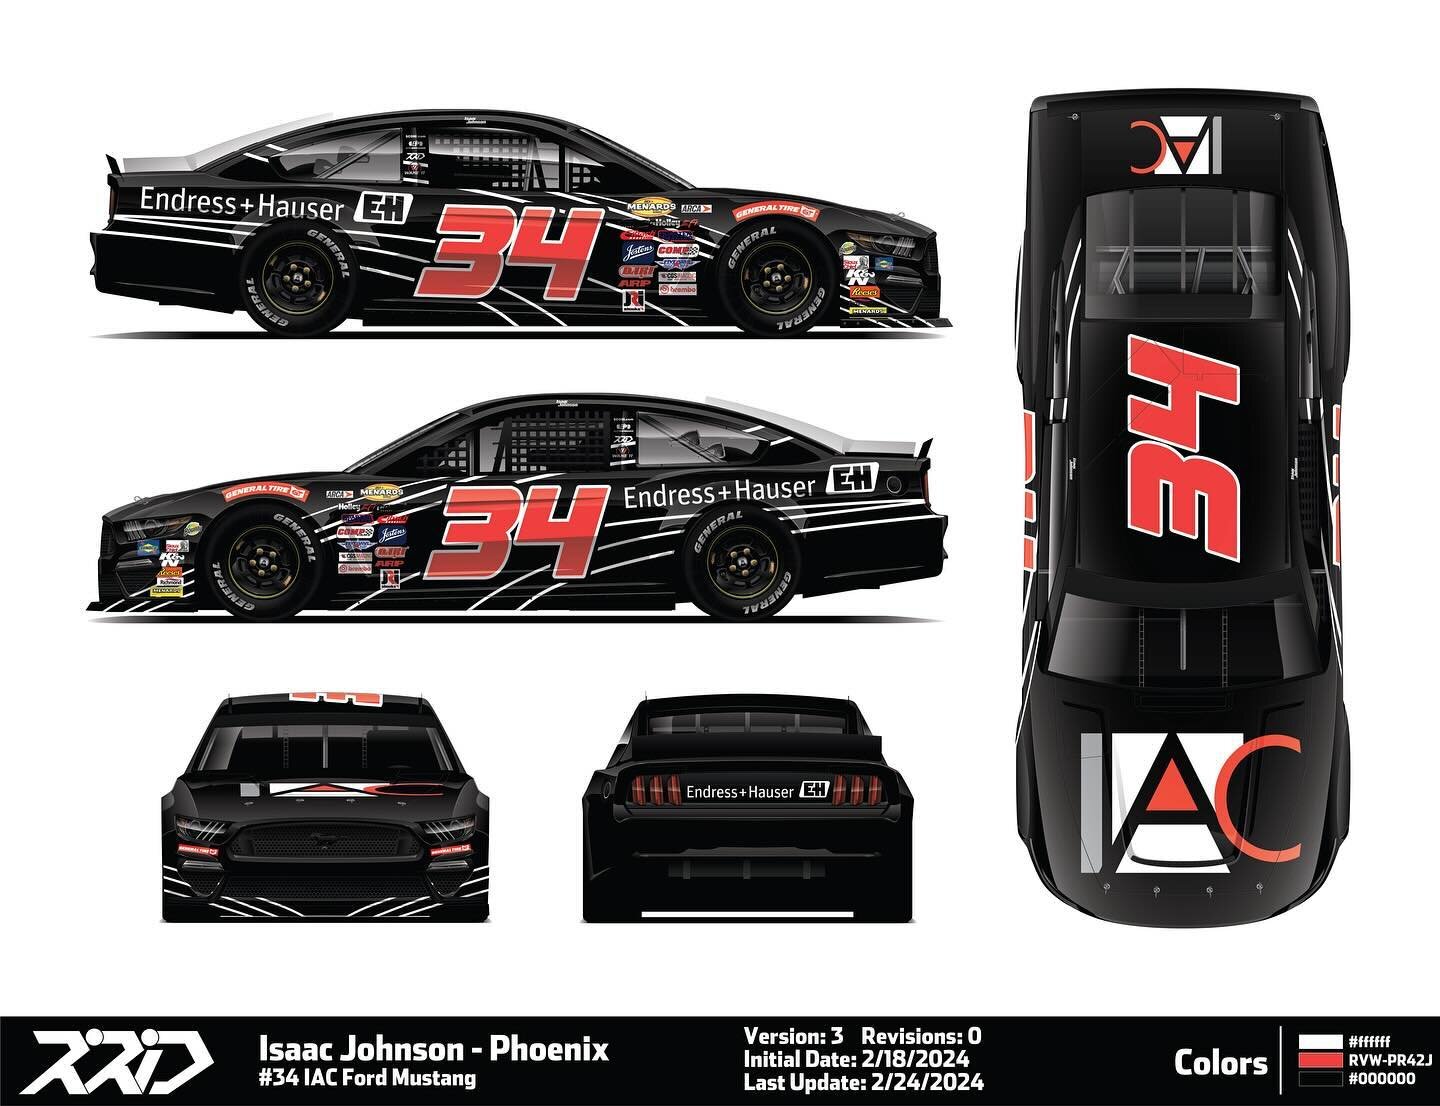 Very excited to announce I will be back in the Instrumentation And Controls, LLC (IAC) / @endresshauser_people #34 Ford for Van Alst Motorsports at @phoenixraceway next weekend in the ARCA Menards Series! Truly grateful for the opportunity to get bac